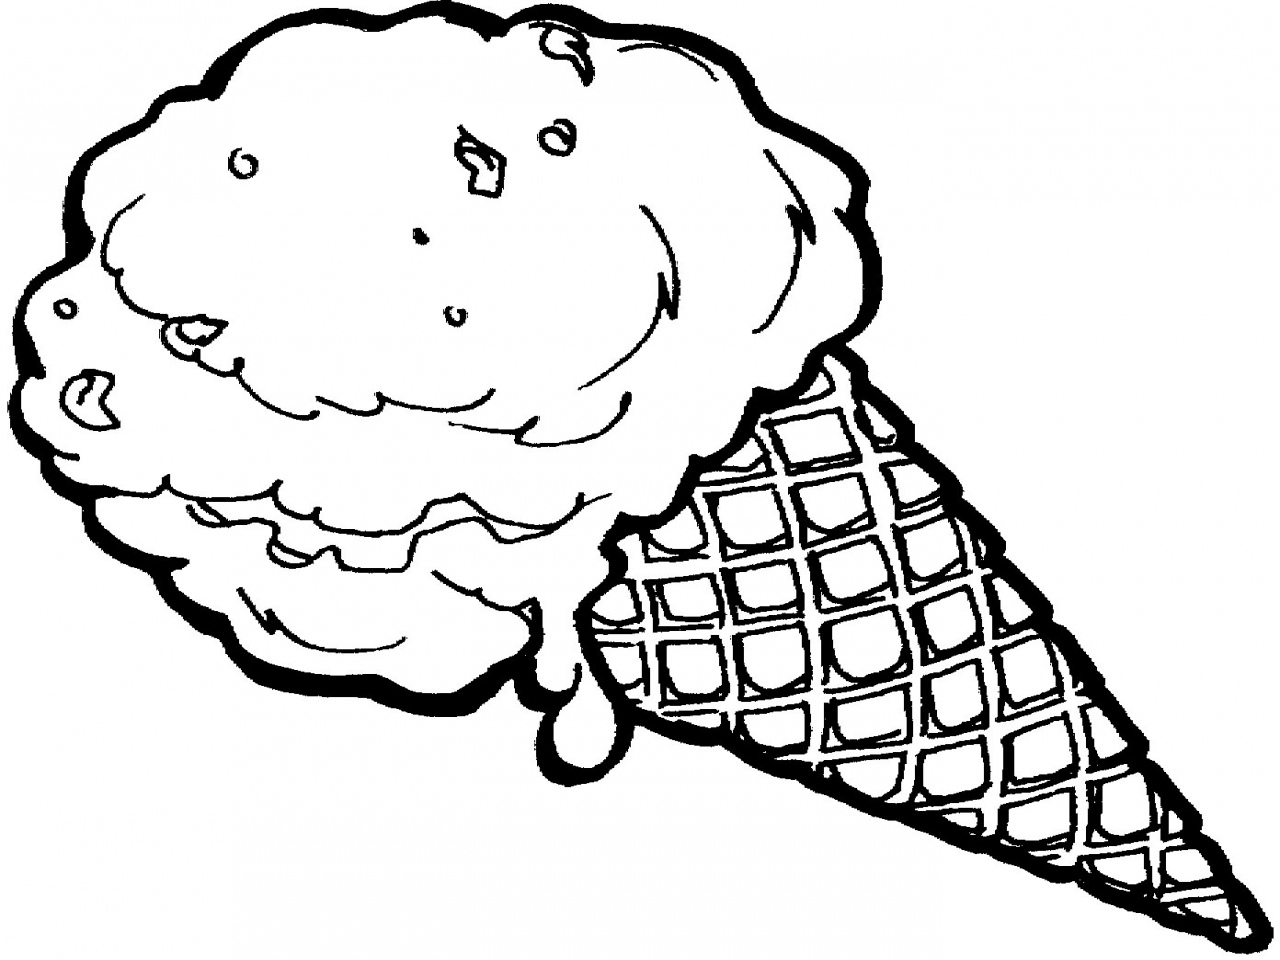 Ice Cream Scoops Coloring Pages - Coloring Home